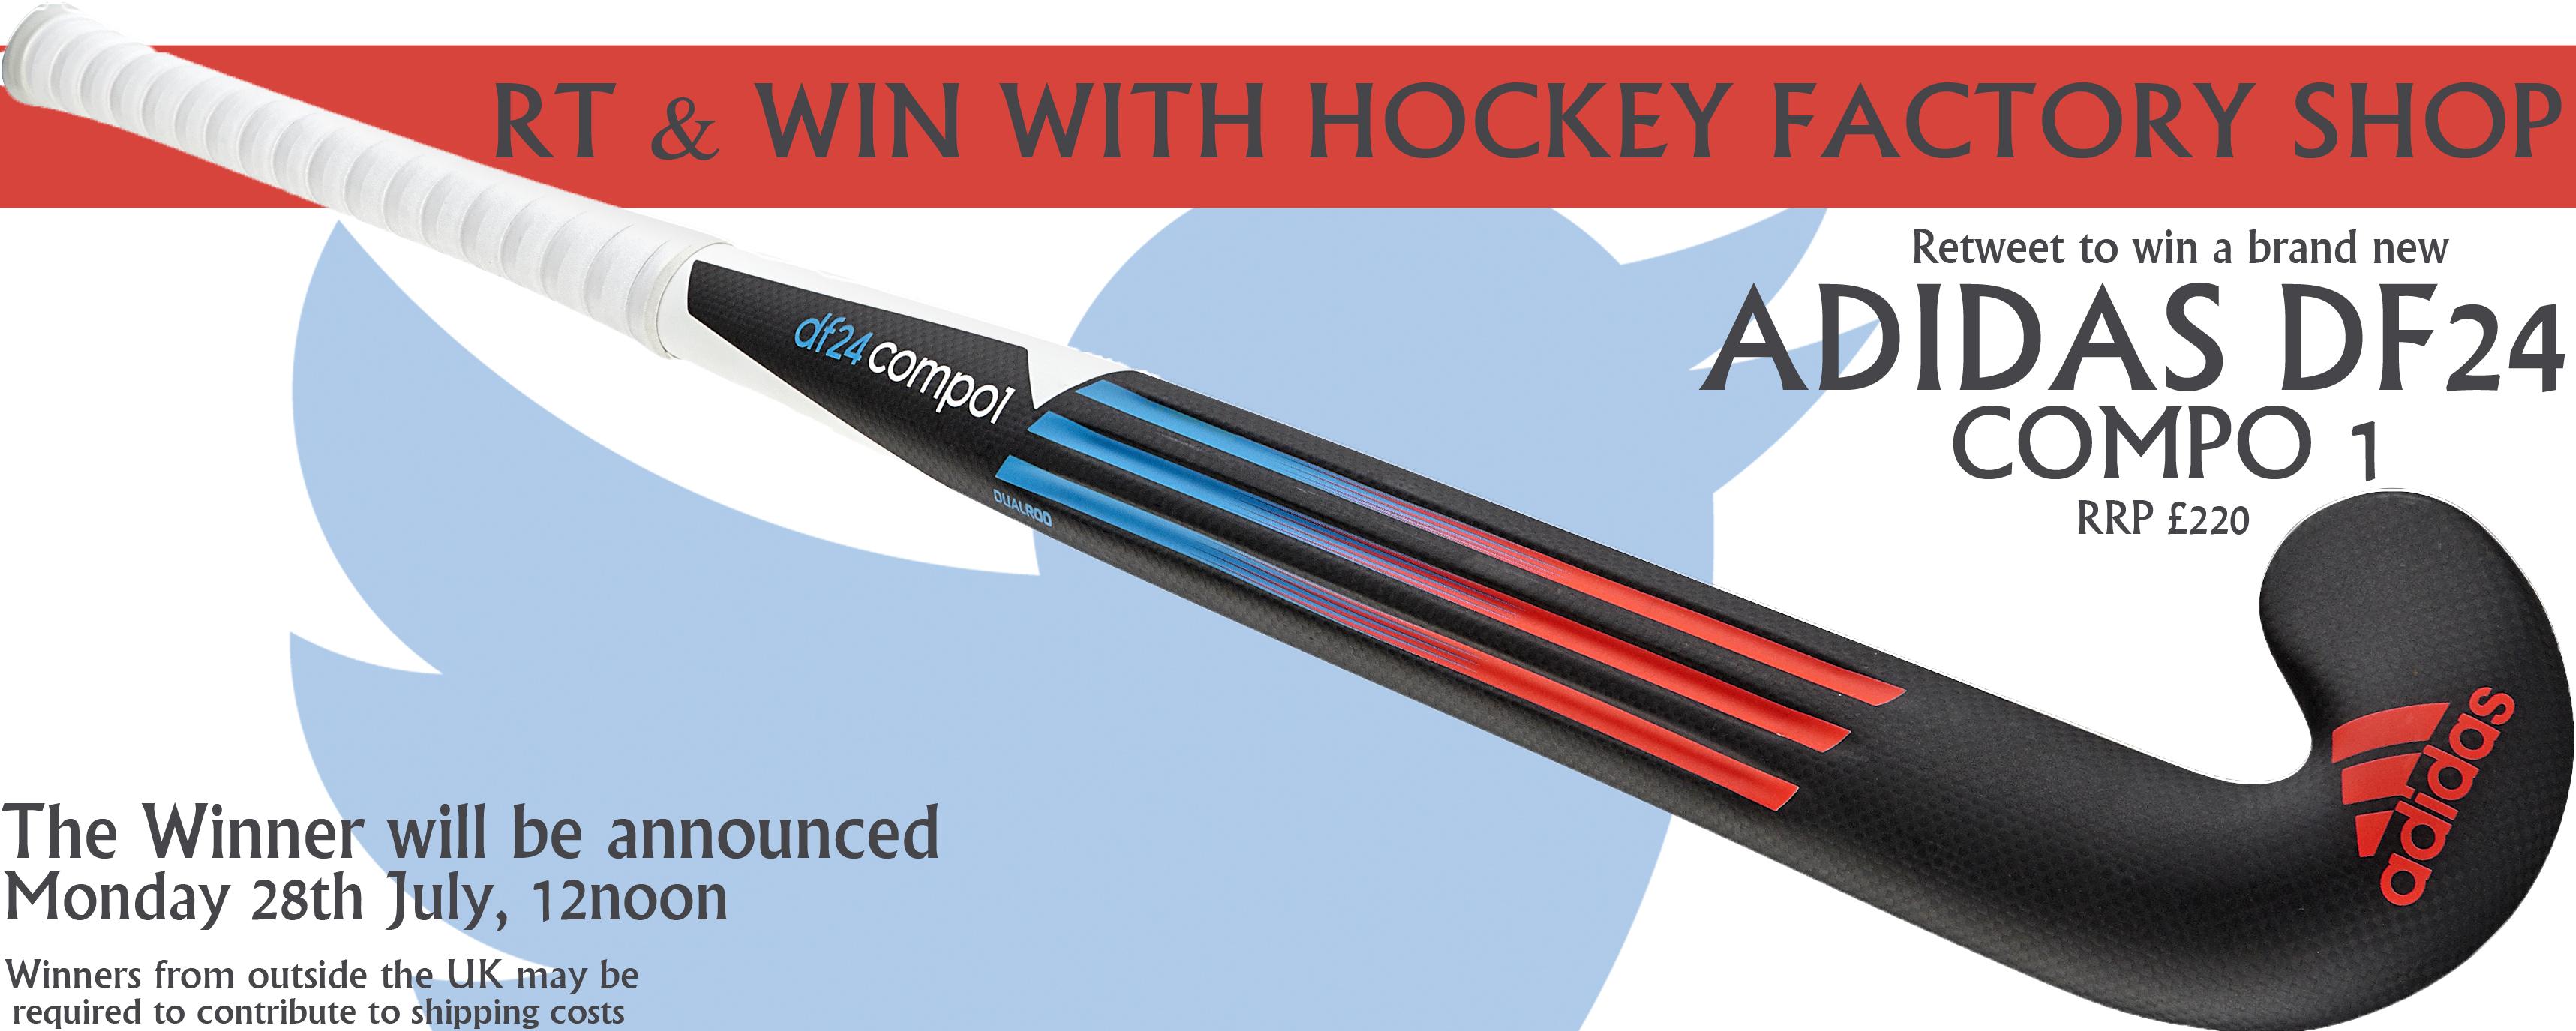 Hockey Factory Shop Twitter: "WIN an Adidas DF24 Compo 1 Stick! To enter, retweet this before Monday 12pm (RRP £220) @adidas_Hockey @adidasUK http://t.co/Ckr7vYDN9o" / Twitter